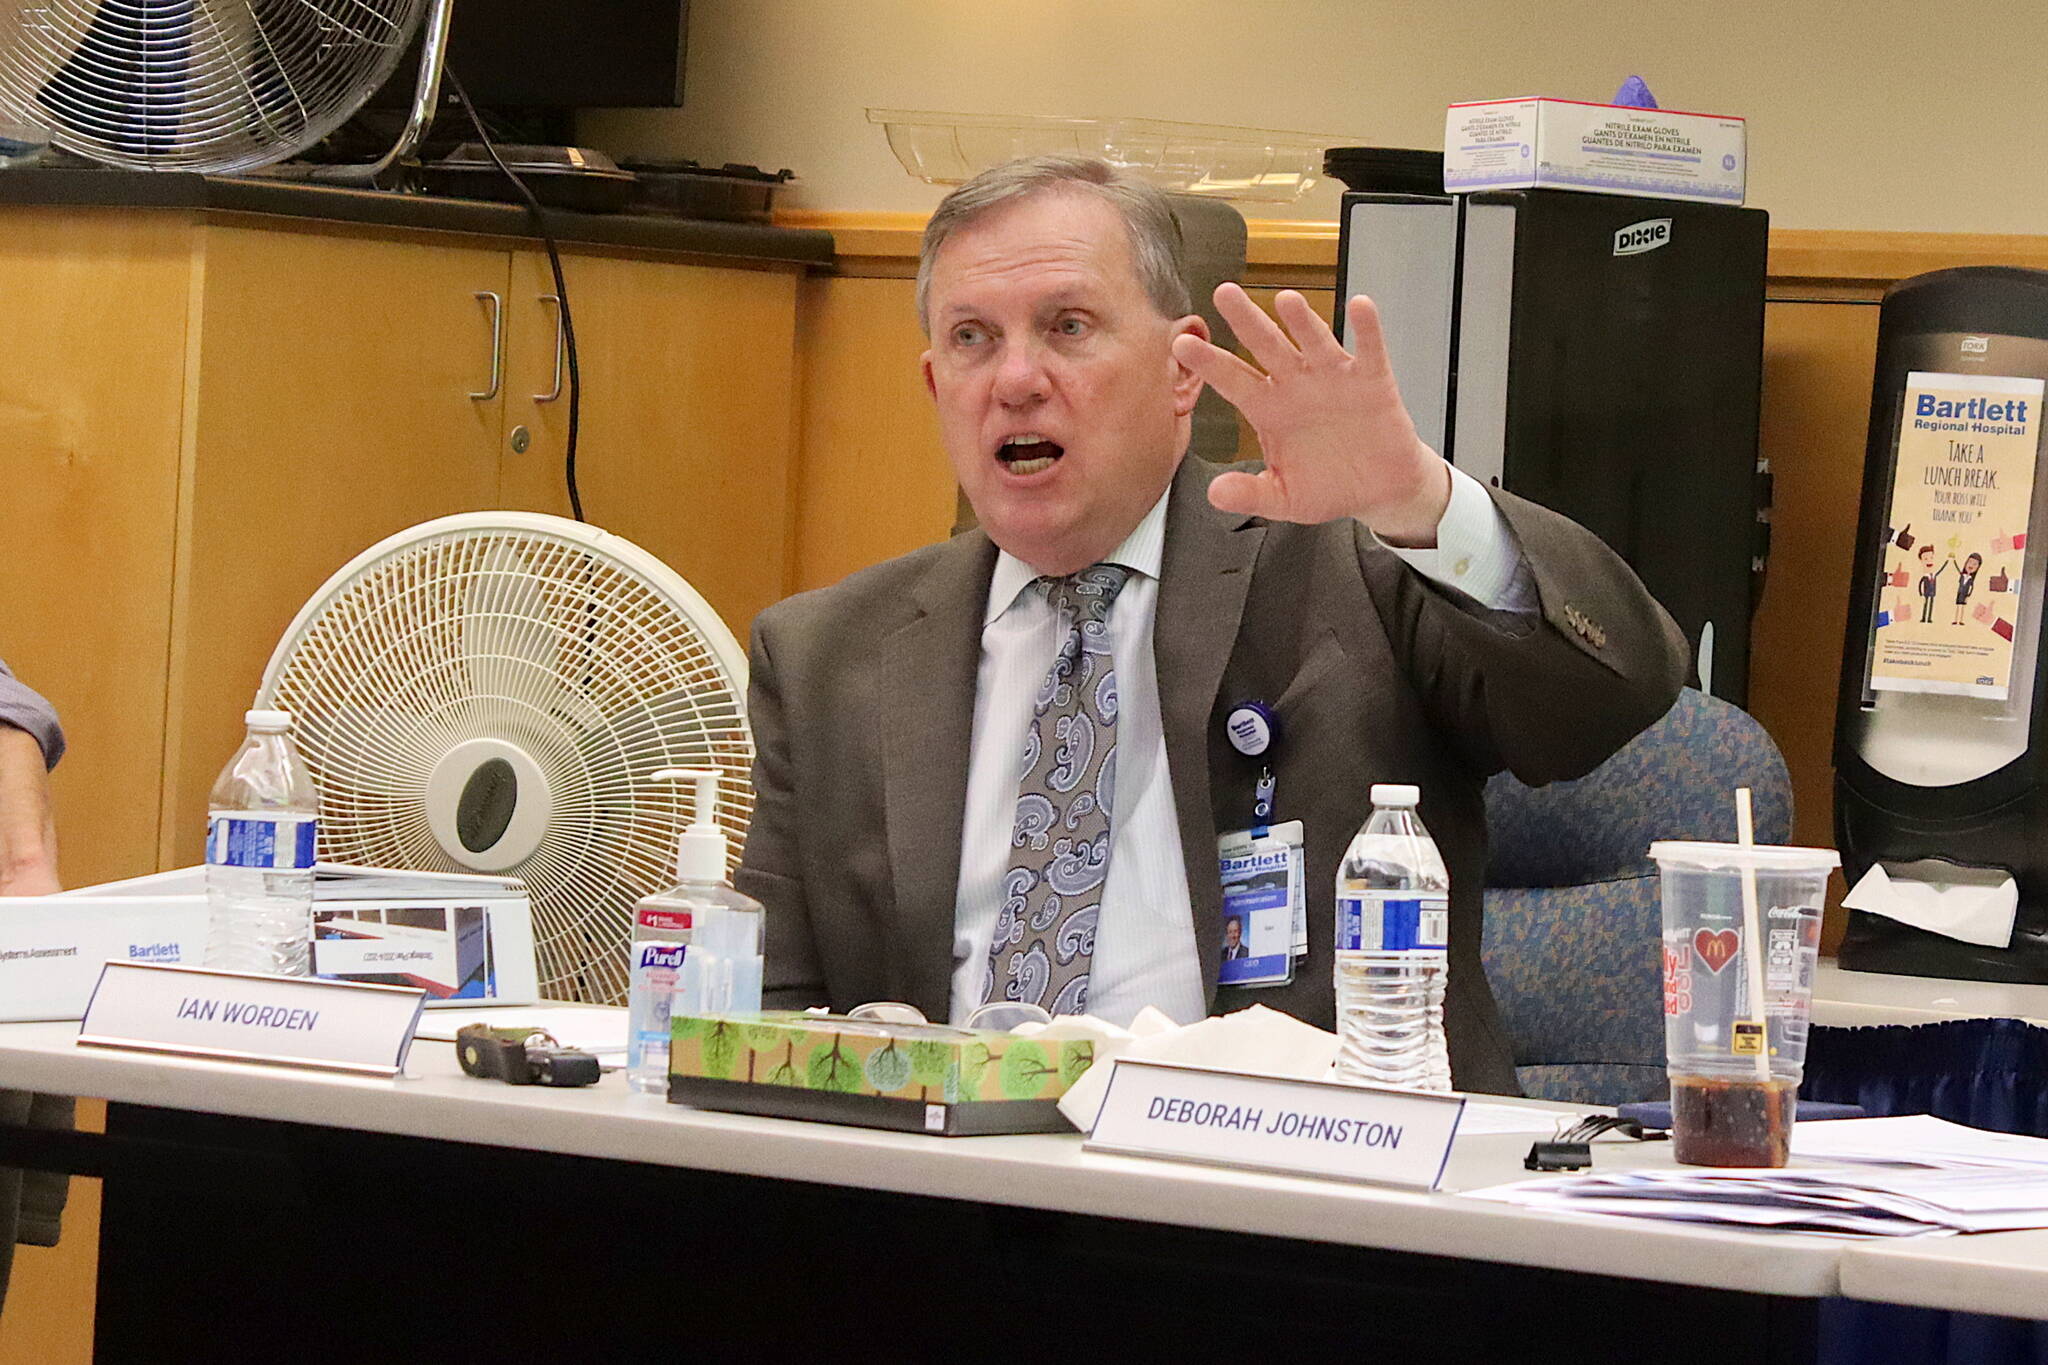 Ian Worden, interim CEO at Bartlett Regional Hospital, presents an update about the hospital’s financial situation during a board of director’s meeting on Tuesday night. (Mark Sabbatini / Juneau Empire)